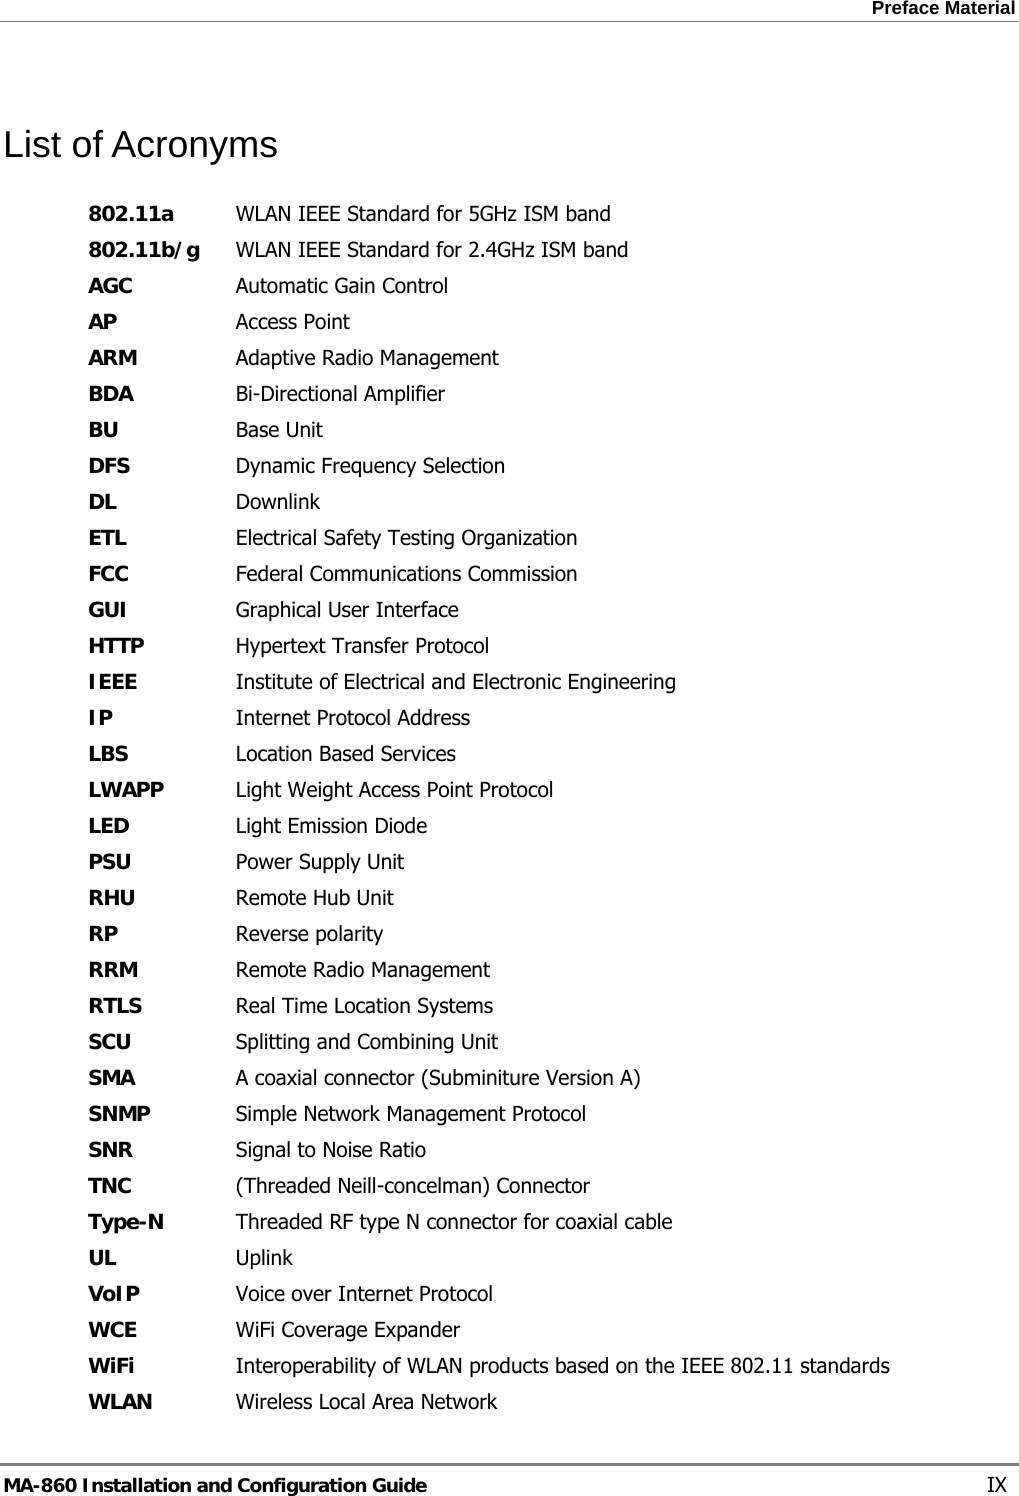 Preface Material  List of Acronyms 802.11a  WLAN IEEE Standard for 5GHz ISM band 802.11b/g  WLAN IEEE Standard for 2.4GHz ISM band AGC  Automatic Gain Control AP  Access Point ARM  Adaptive Radio Management  BDA  Bi-Directional Amplifier BU  Base Unit DFS  Dynamic Frequency Selection DL Downlink ETL  Electrical Safety Testing Organization FCC  Federal Communications Commission GUI  Graphical User Interface HTTP  Hypertext Transfer Protocol IEEE  Institute of Electrical and Electronic Engineering IP  Internet Protocol Address LBS  Location Based Services LWAPP  Light Weight Access Point Protocol LED  Light Emission Diode PSU  Power Supply Unit RHU  Remote Hub Unit RP  Reverse polarity RRM  Remote Radio Management RTLS  Real Time Location Systems SCU  Splitting and Combining Unit SMA  A coaxial connector (Subminiture Version A) SNMP  Simple Network Management Protocol SNR  Signal to Noise Ratio TNC  (Threaded Neill-concelman) Connector Type-N  Threaded RF type N connector for coaxial cable UL  Uplink VoIP  Voice over Internet Protocol WCE  WiFi Coverage Expander WiFi  Interoperability of WLAN products based on the IEEE 802.11 standards WLAN  Wireless Local Area Network MA-860 Installation and Configuration Guide    IX 